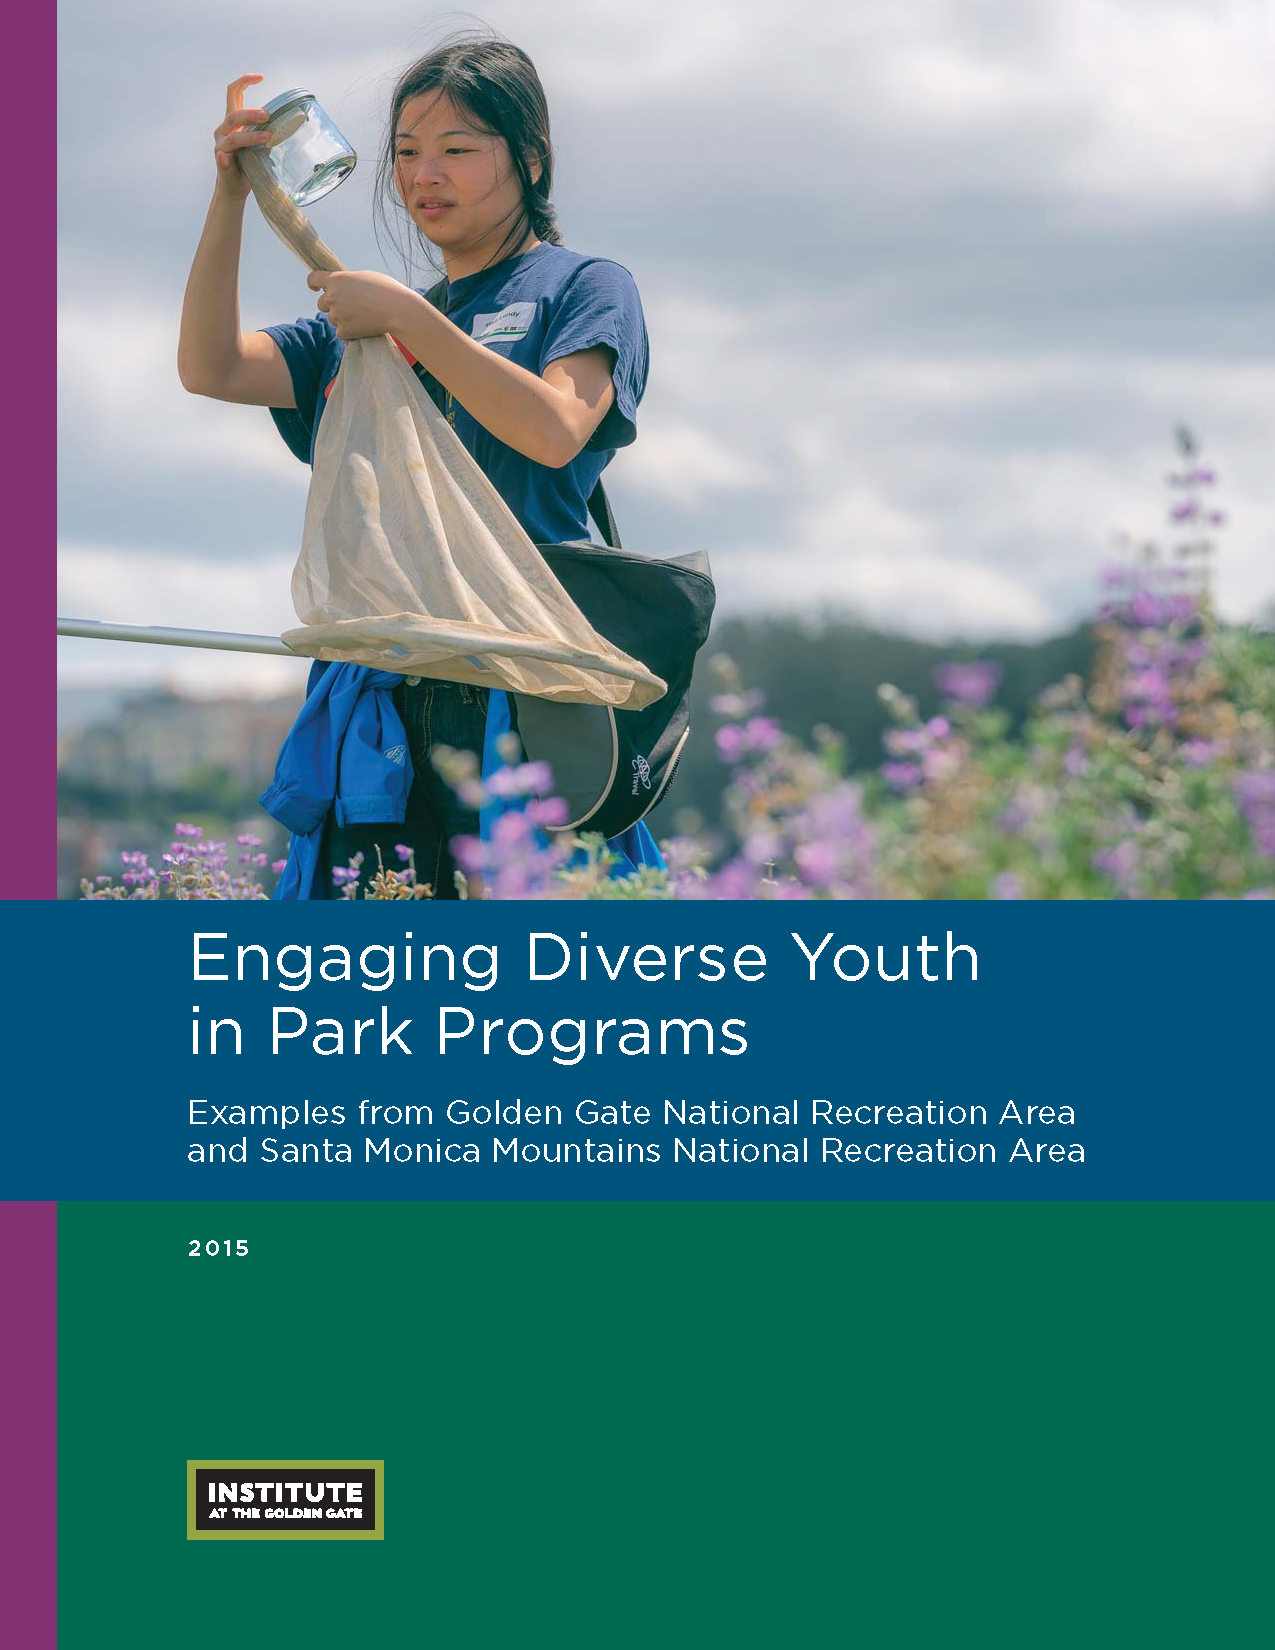 Engaging Youth Report